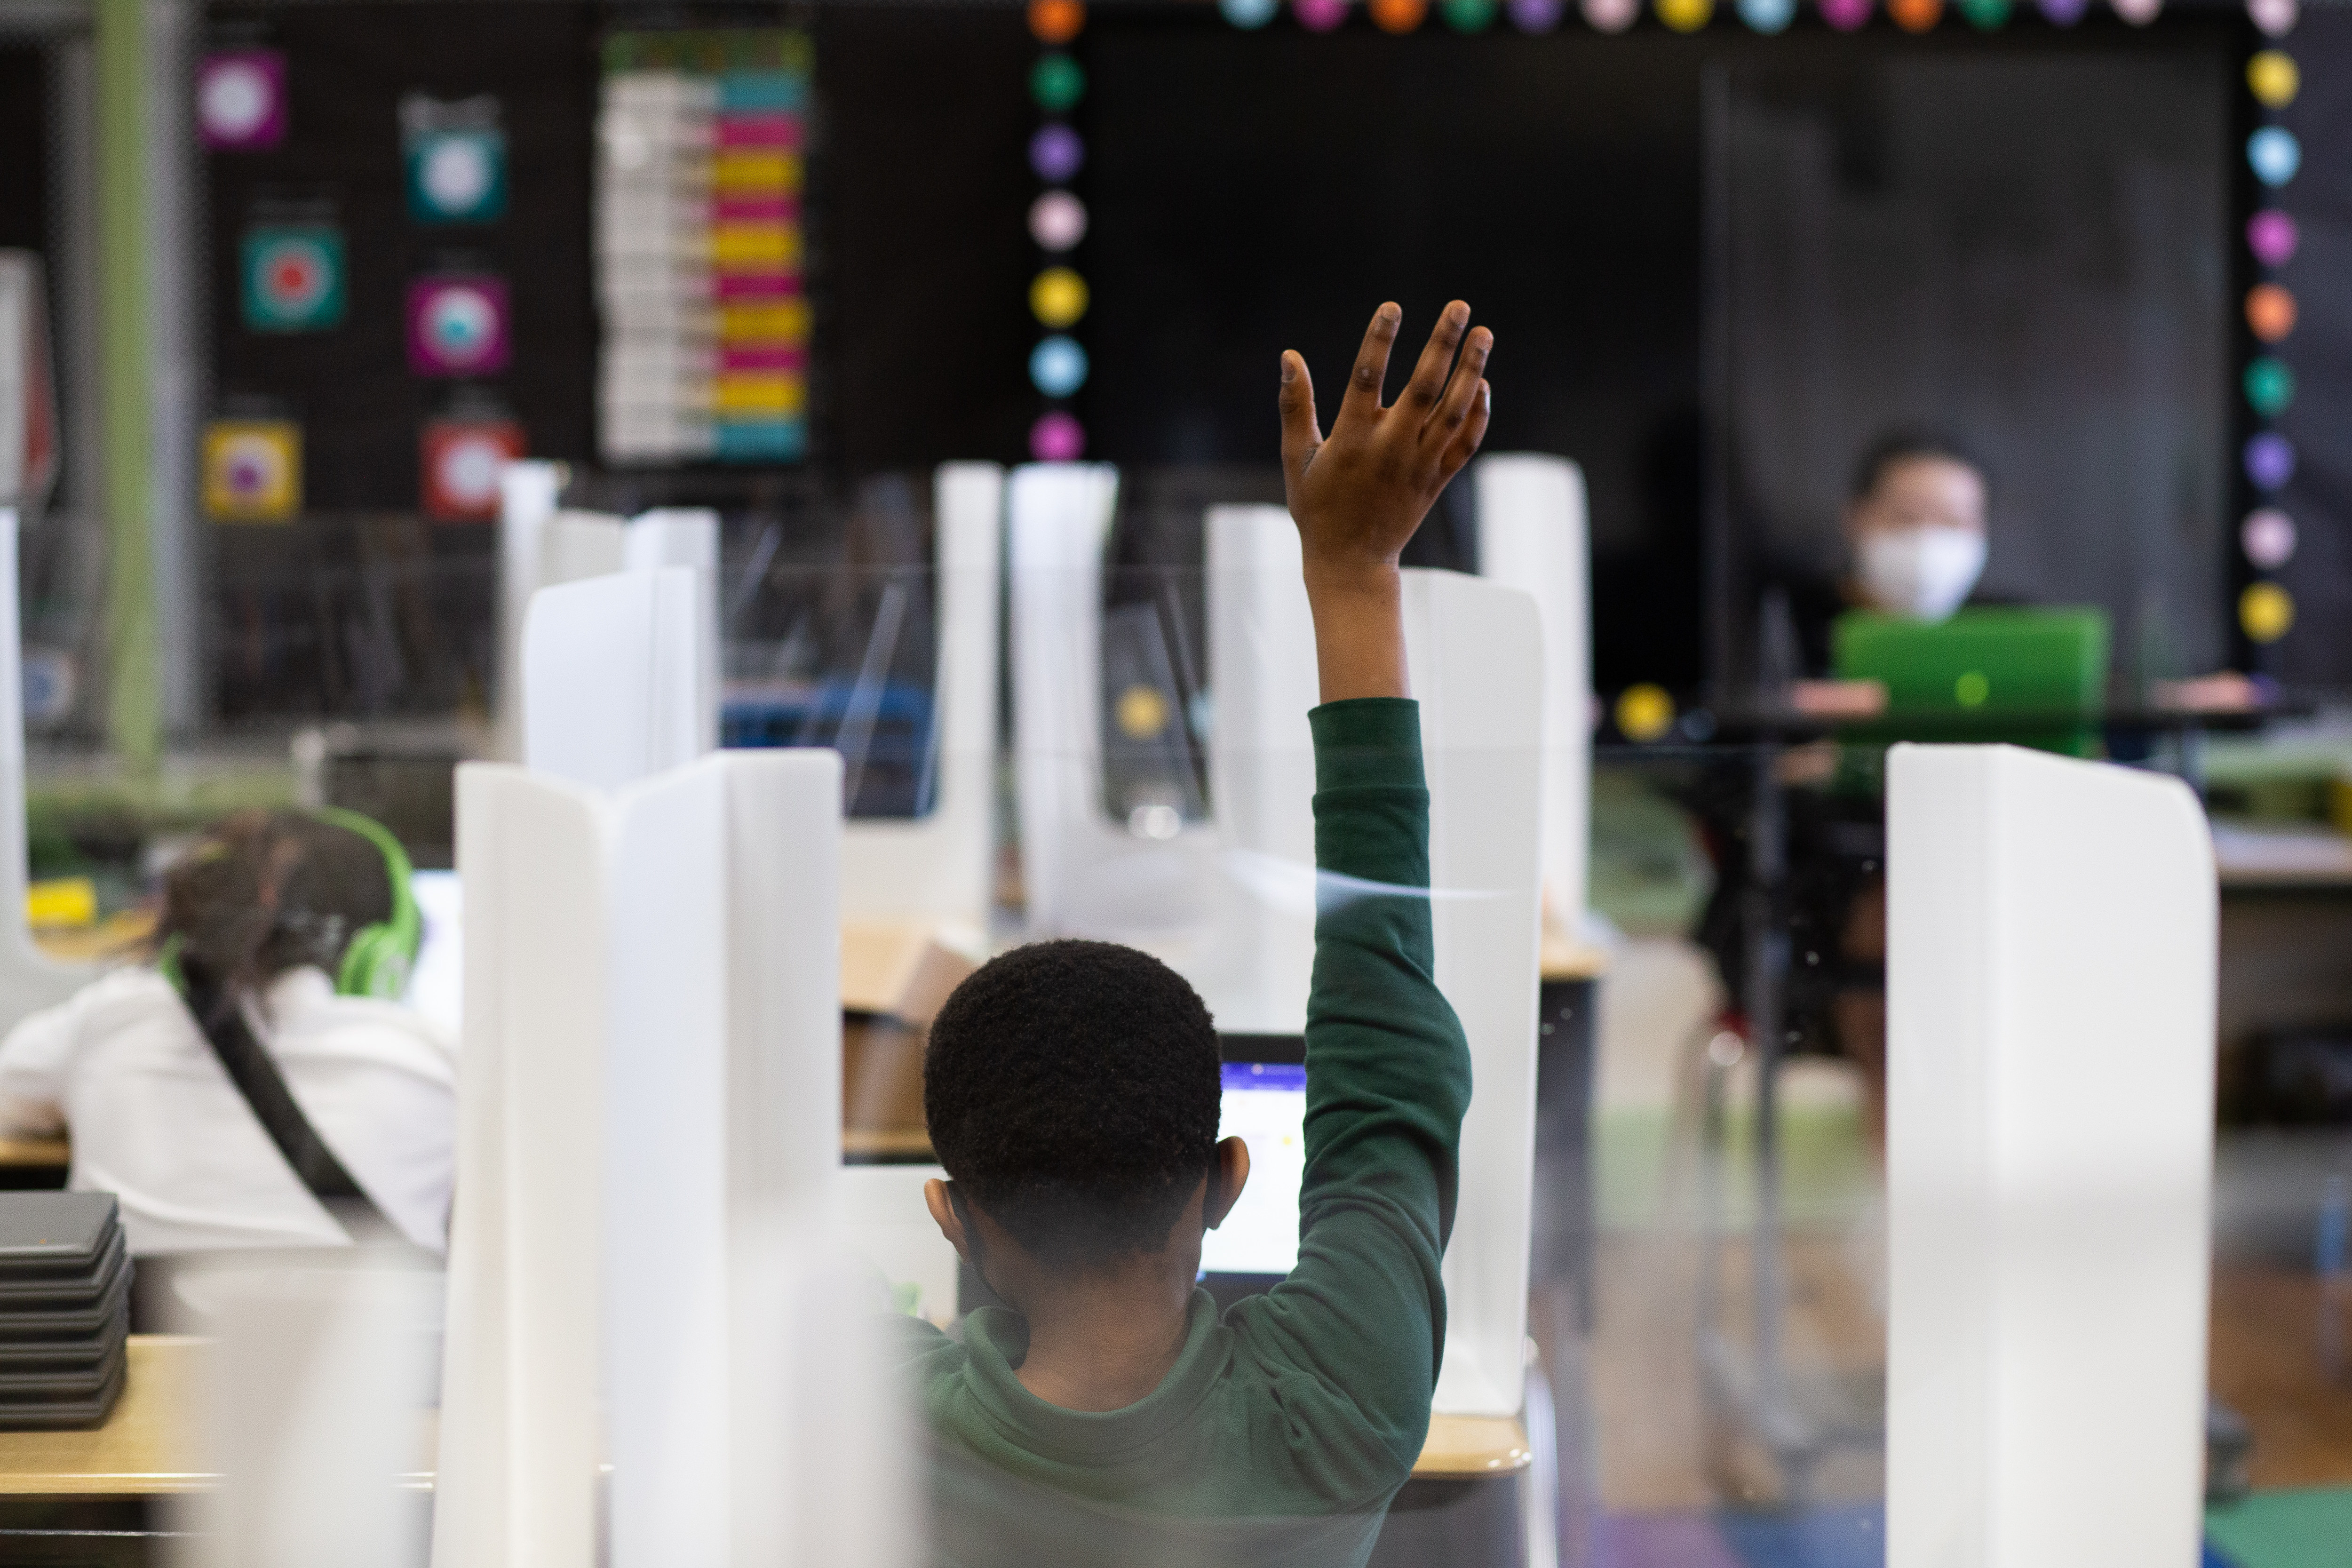 A fourth grade student raises his hand in class. The photo shows the back of the student’s body with his hand in the air. The teacher is visible in the background of the photo, facing the camera. The teacher is wearing a face mask. The student’s desk is surrounded by plastic dividers.